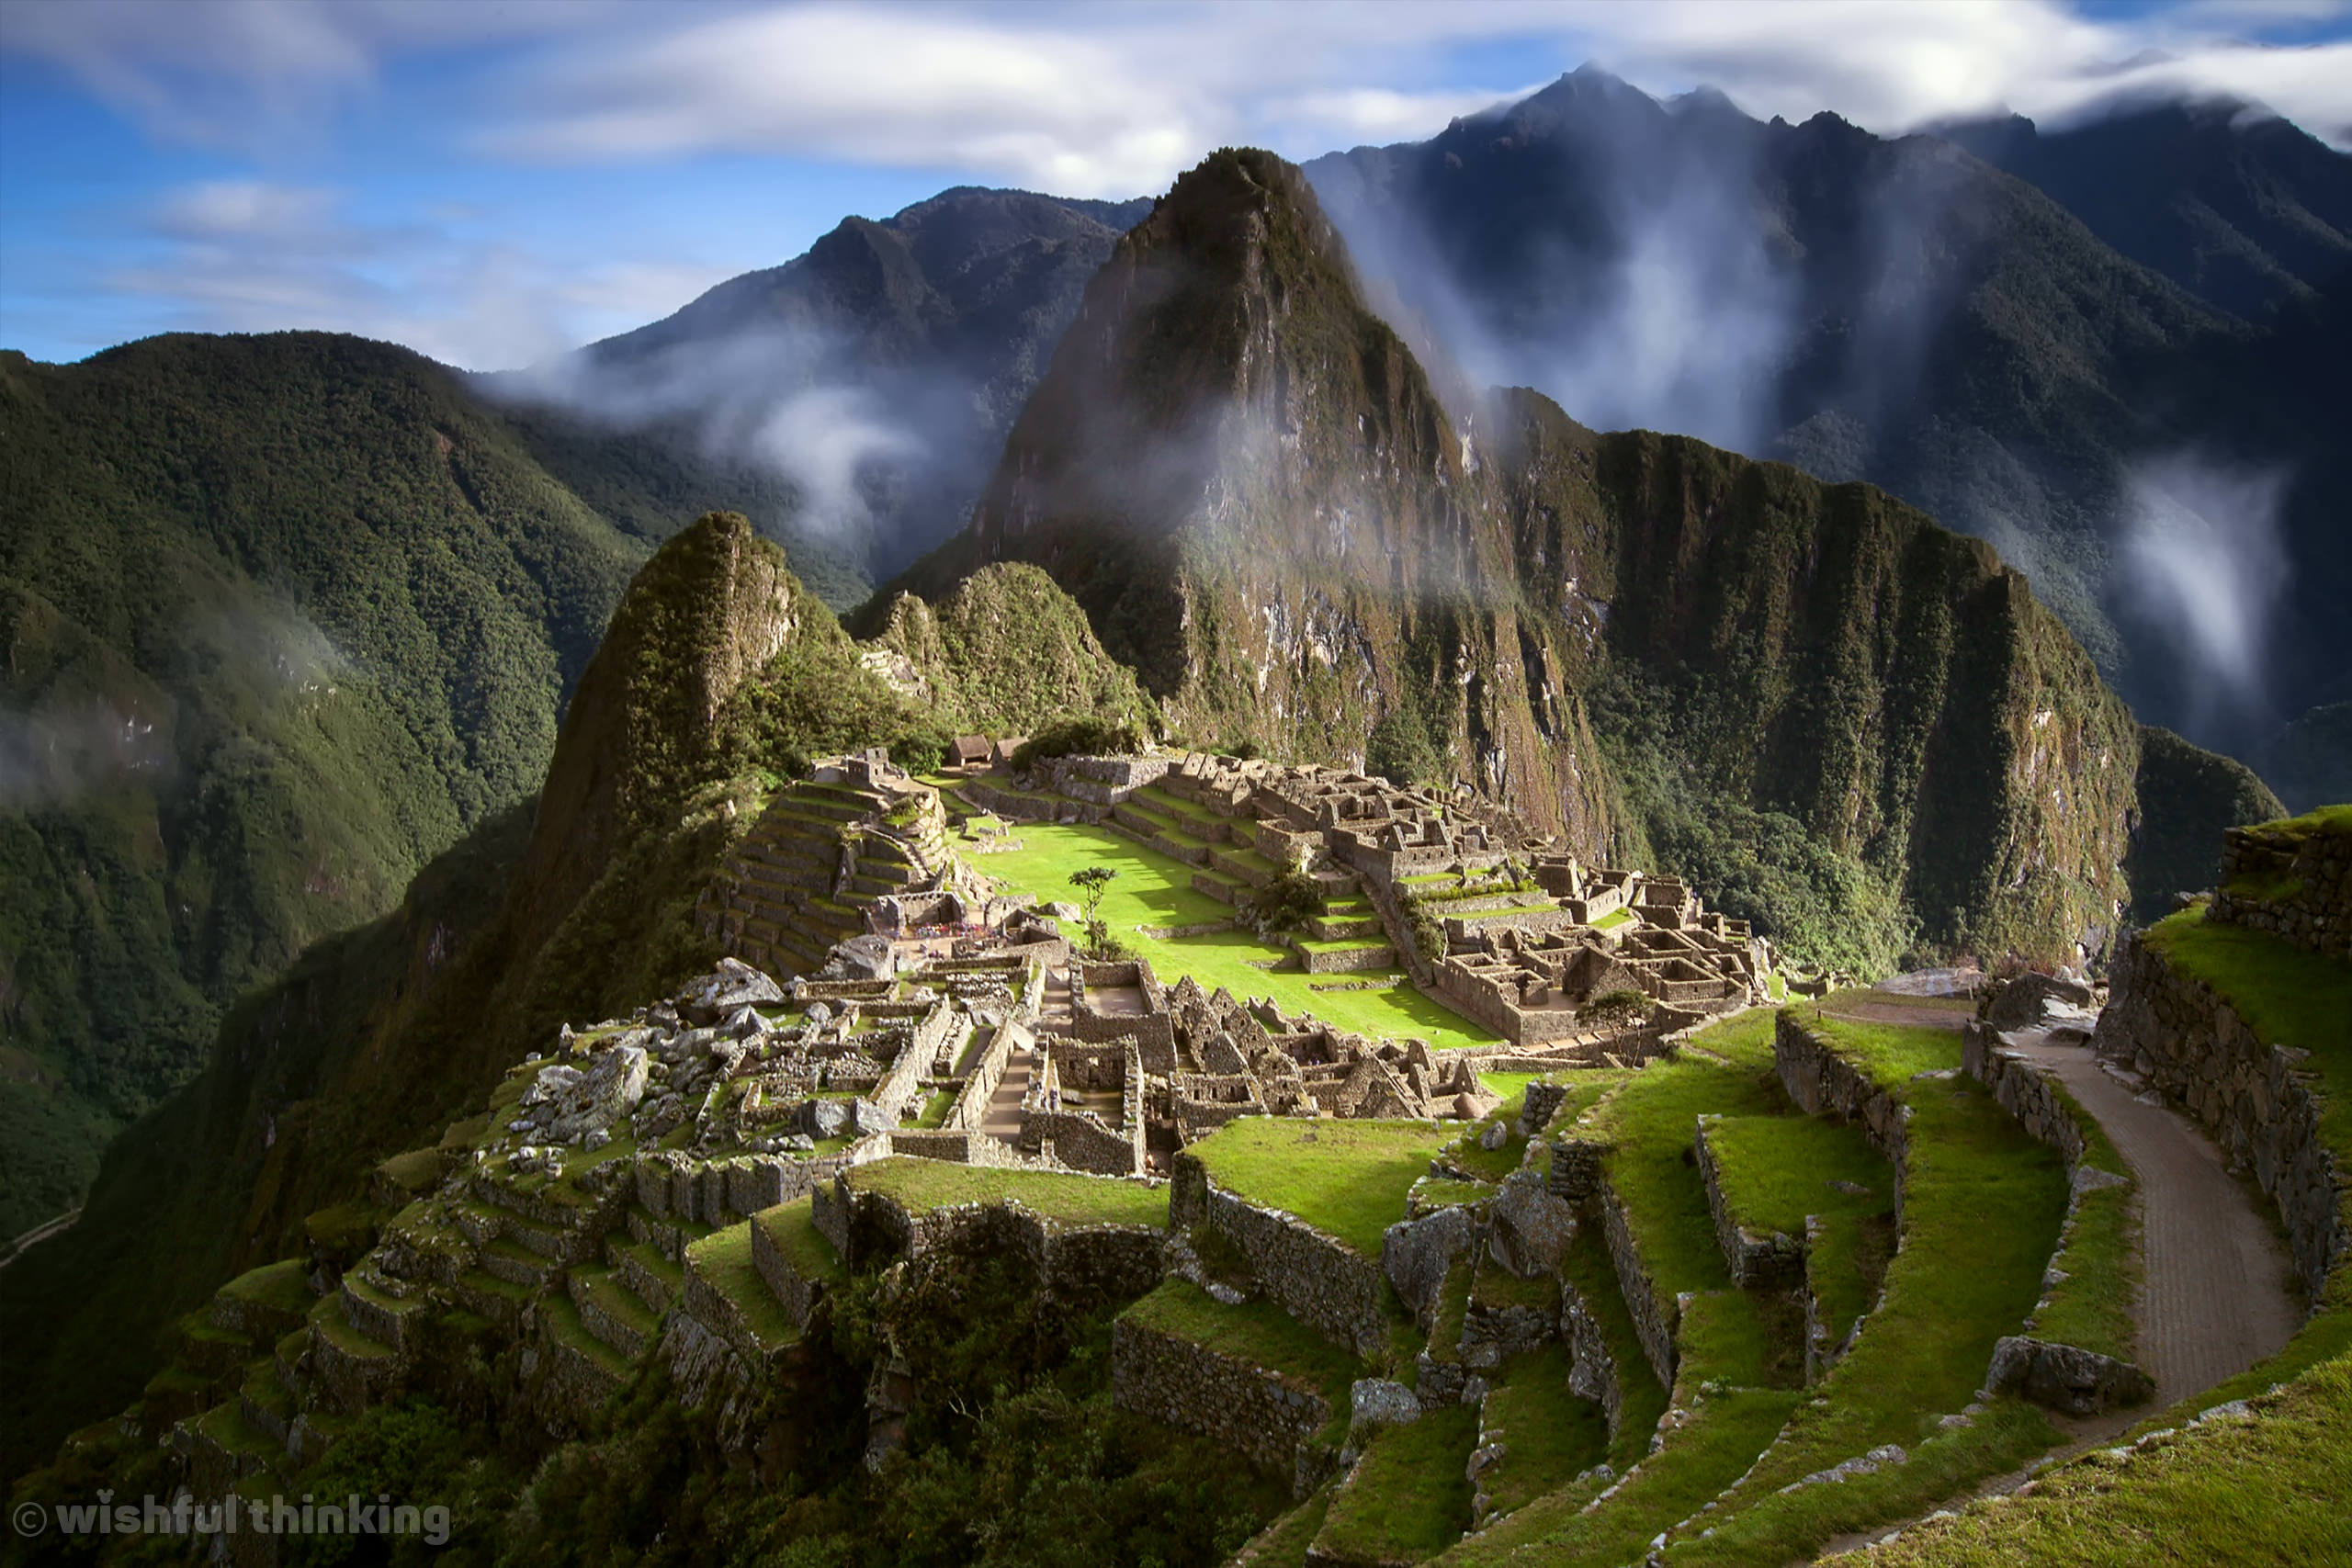 Wisps of misty clouds float above the peaks of Macchu Picchu in the mountains of Peru